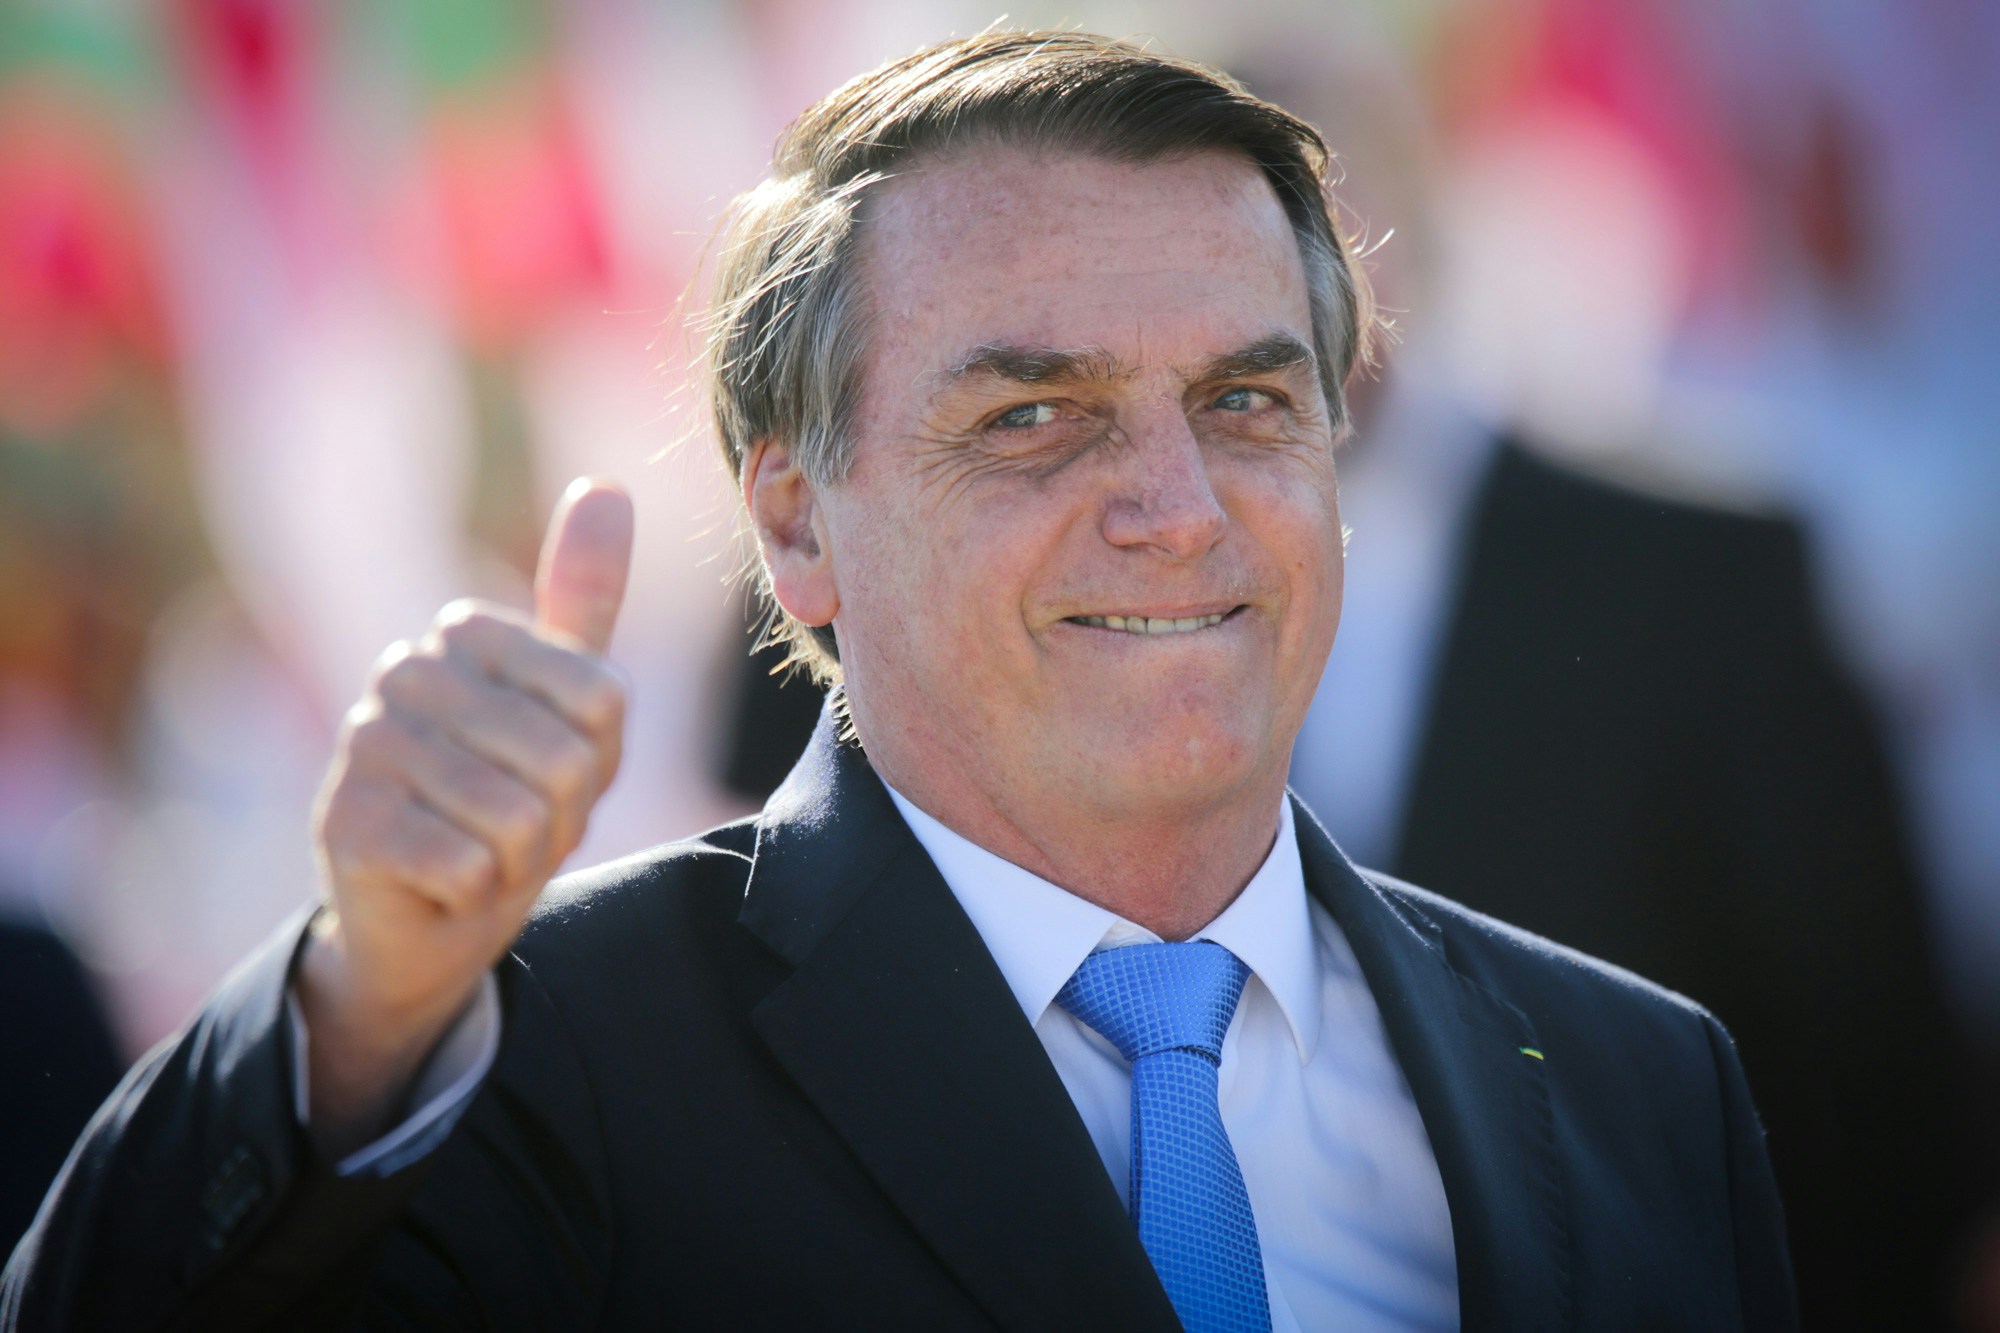 Jair Bolsonaro, Brazil's president, gives a thumbs up as Sebastian Pinera, Chile's president, not pictured, departs after a joint press conference at the Alvorada Palace in Brasilia, Brazil, on Wednesday, Aug. 28, 2019. Bolsonaro's environmental policies have come under pressure as more than 75,000 fires have swept across the country this year, an 84% increase compared to last year, according to the country's National Institute for Space Research. Photographer: Andre Coelho/Bloomberg via Getty Images